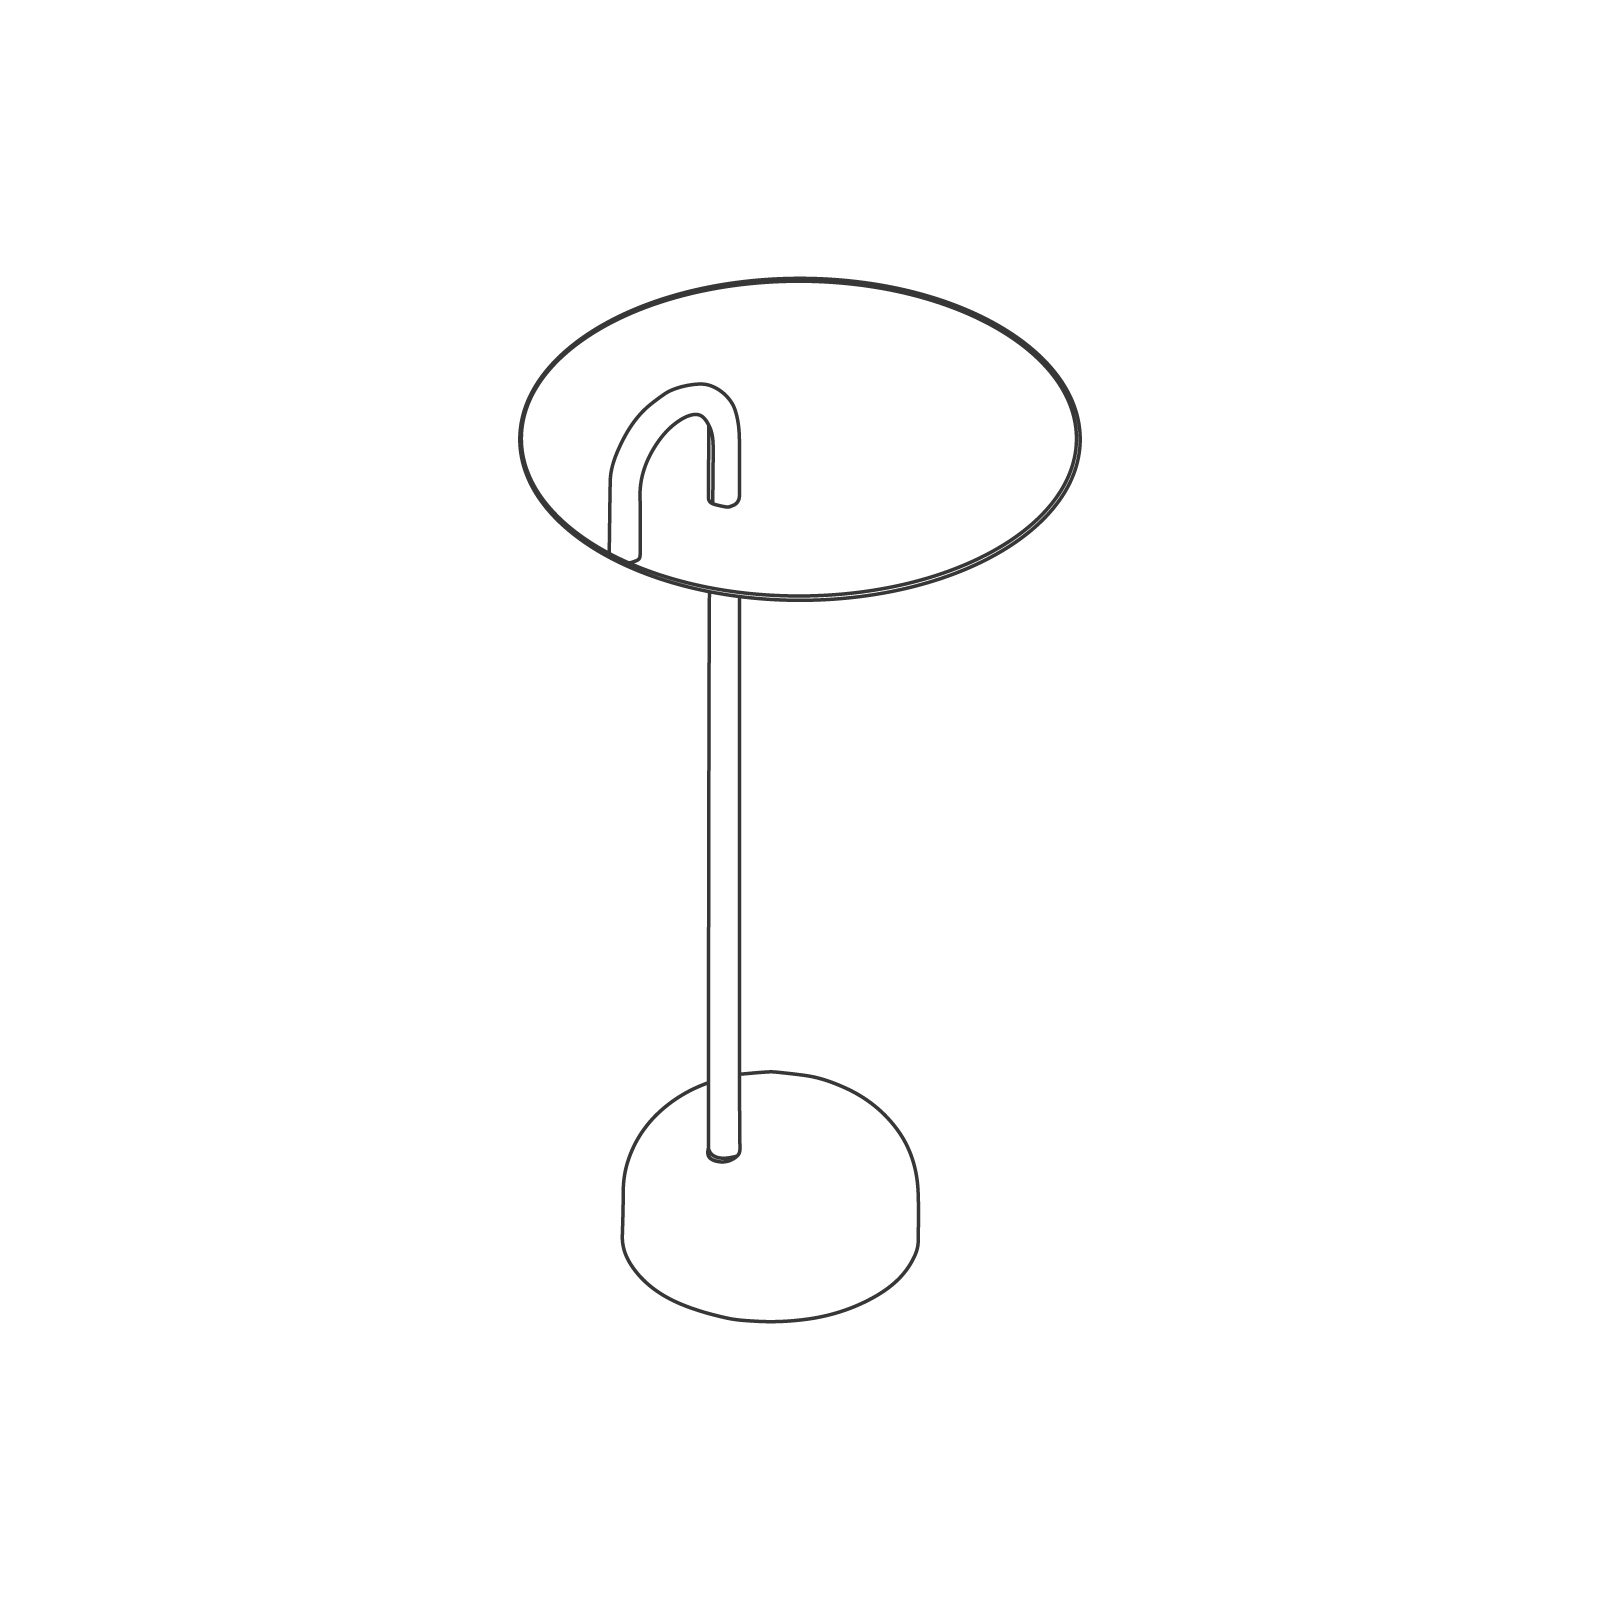 A line drawing - Bowler Table